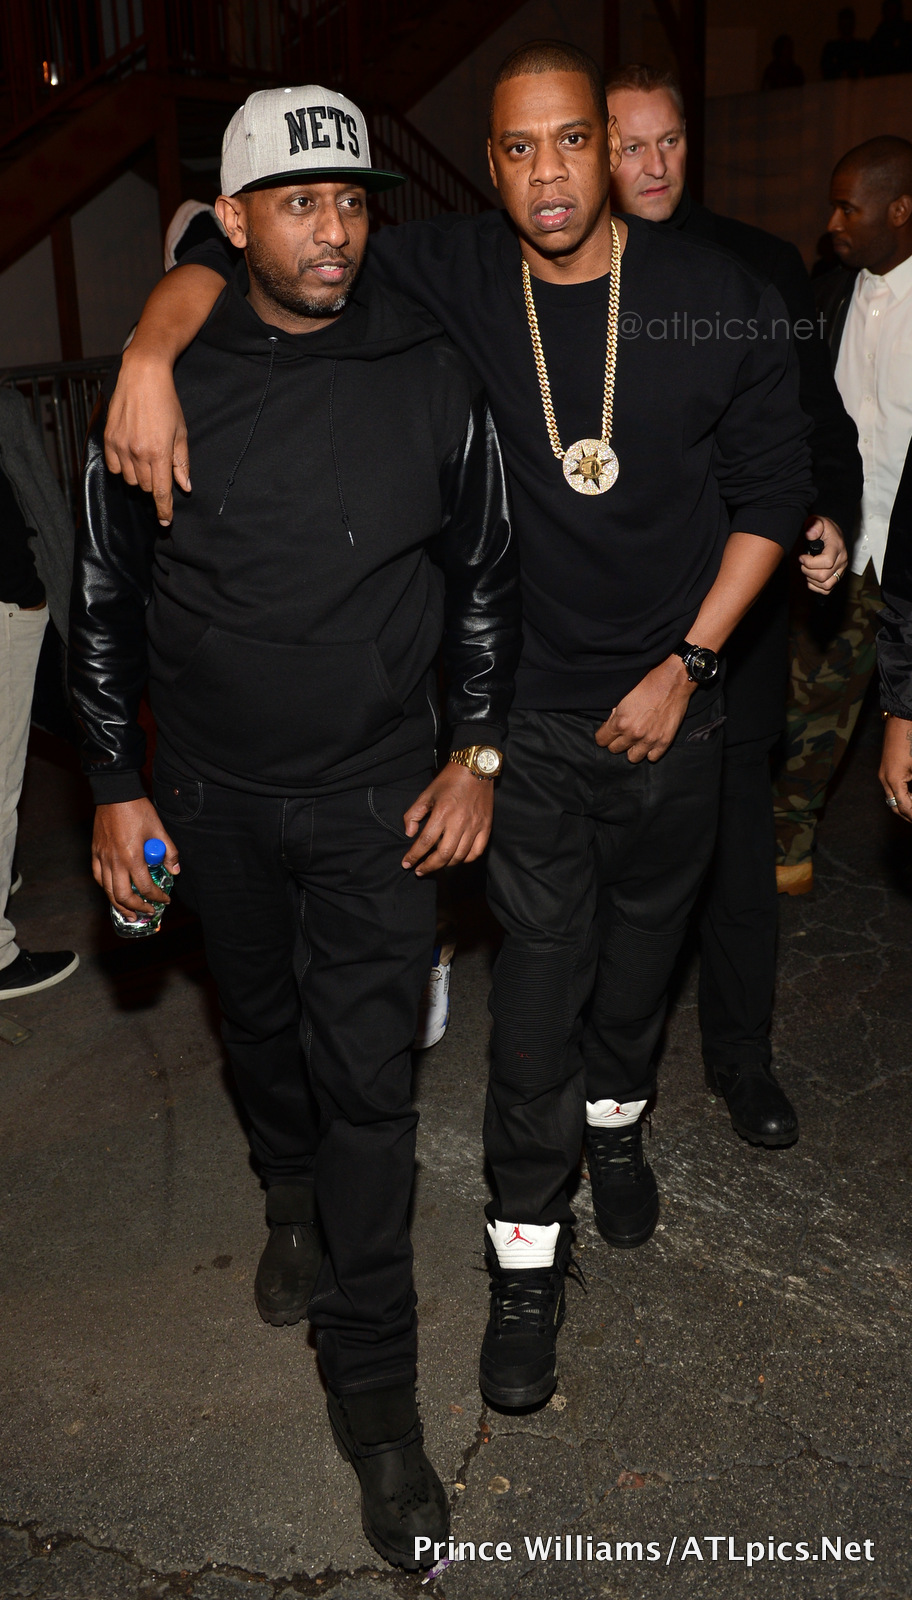 [Photos] Beyonce & Jay Z Party in Atlanta With Trey Songz, The Dream ...